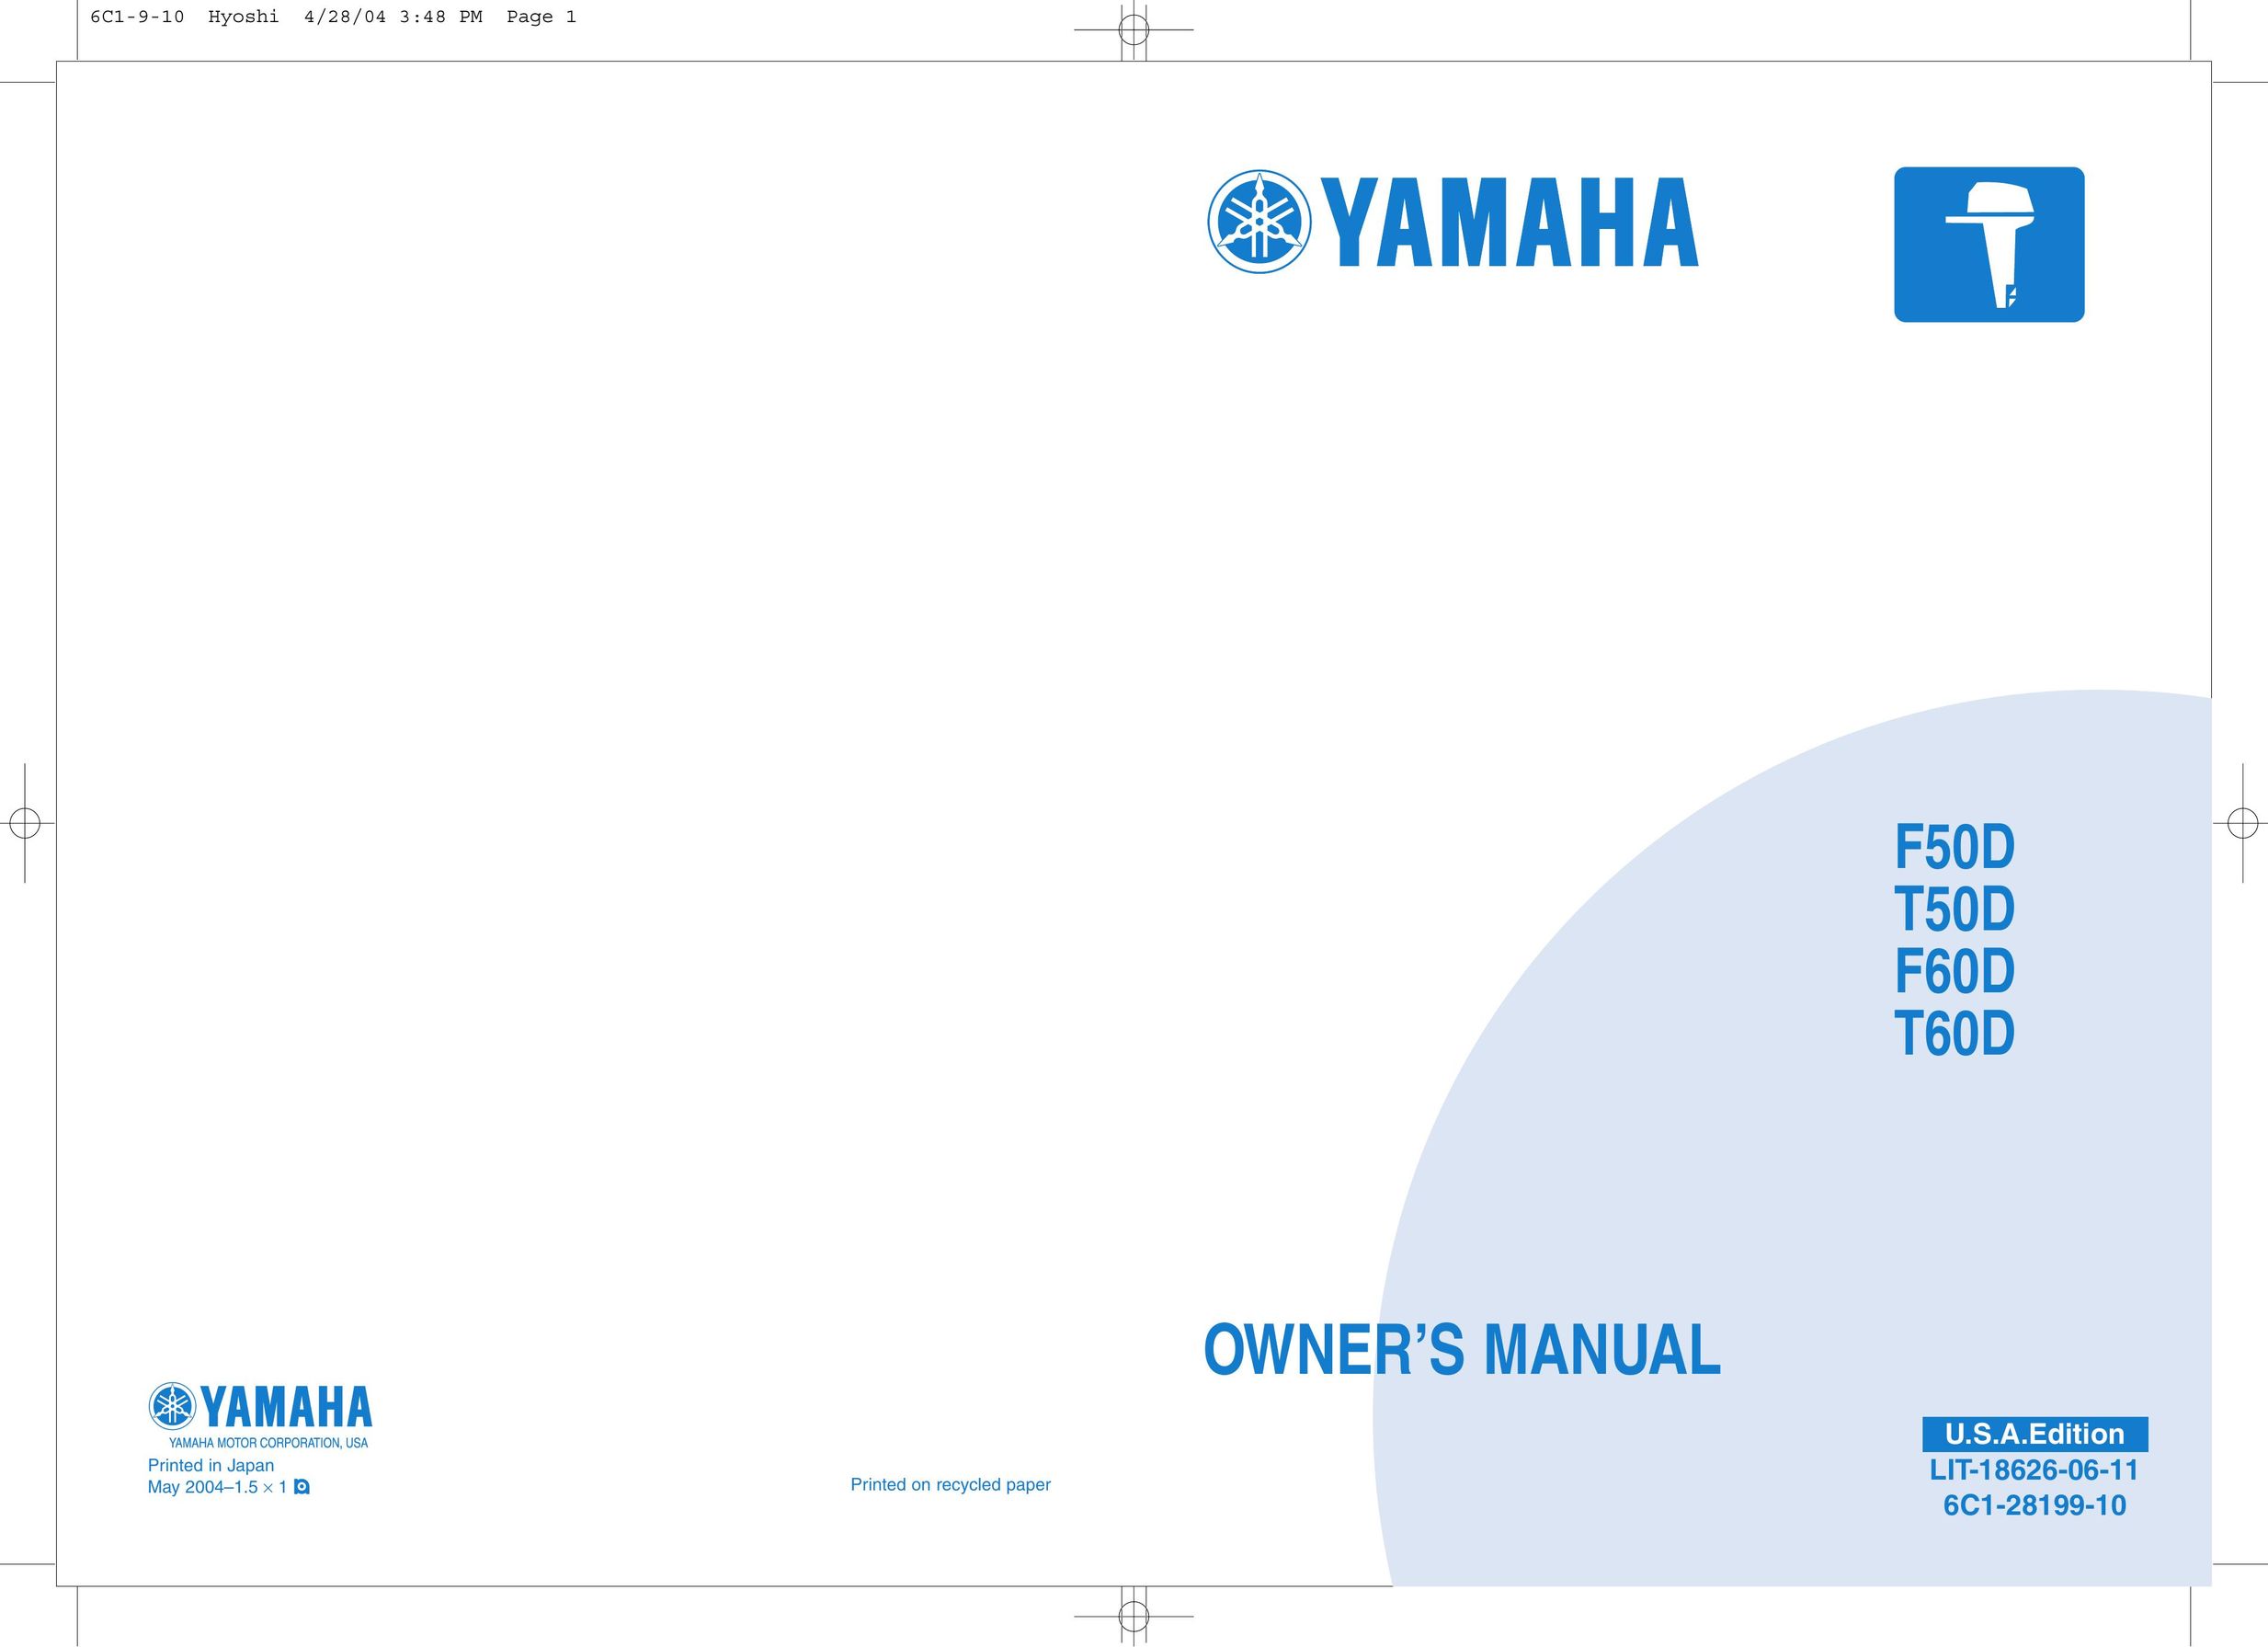 Yamaha F50D Network Router User Manual